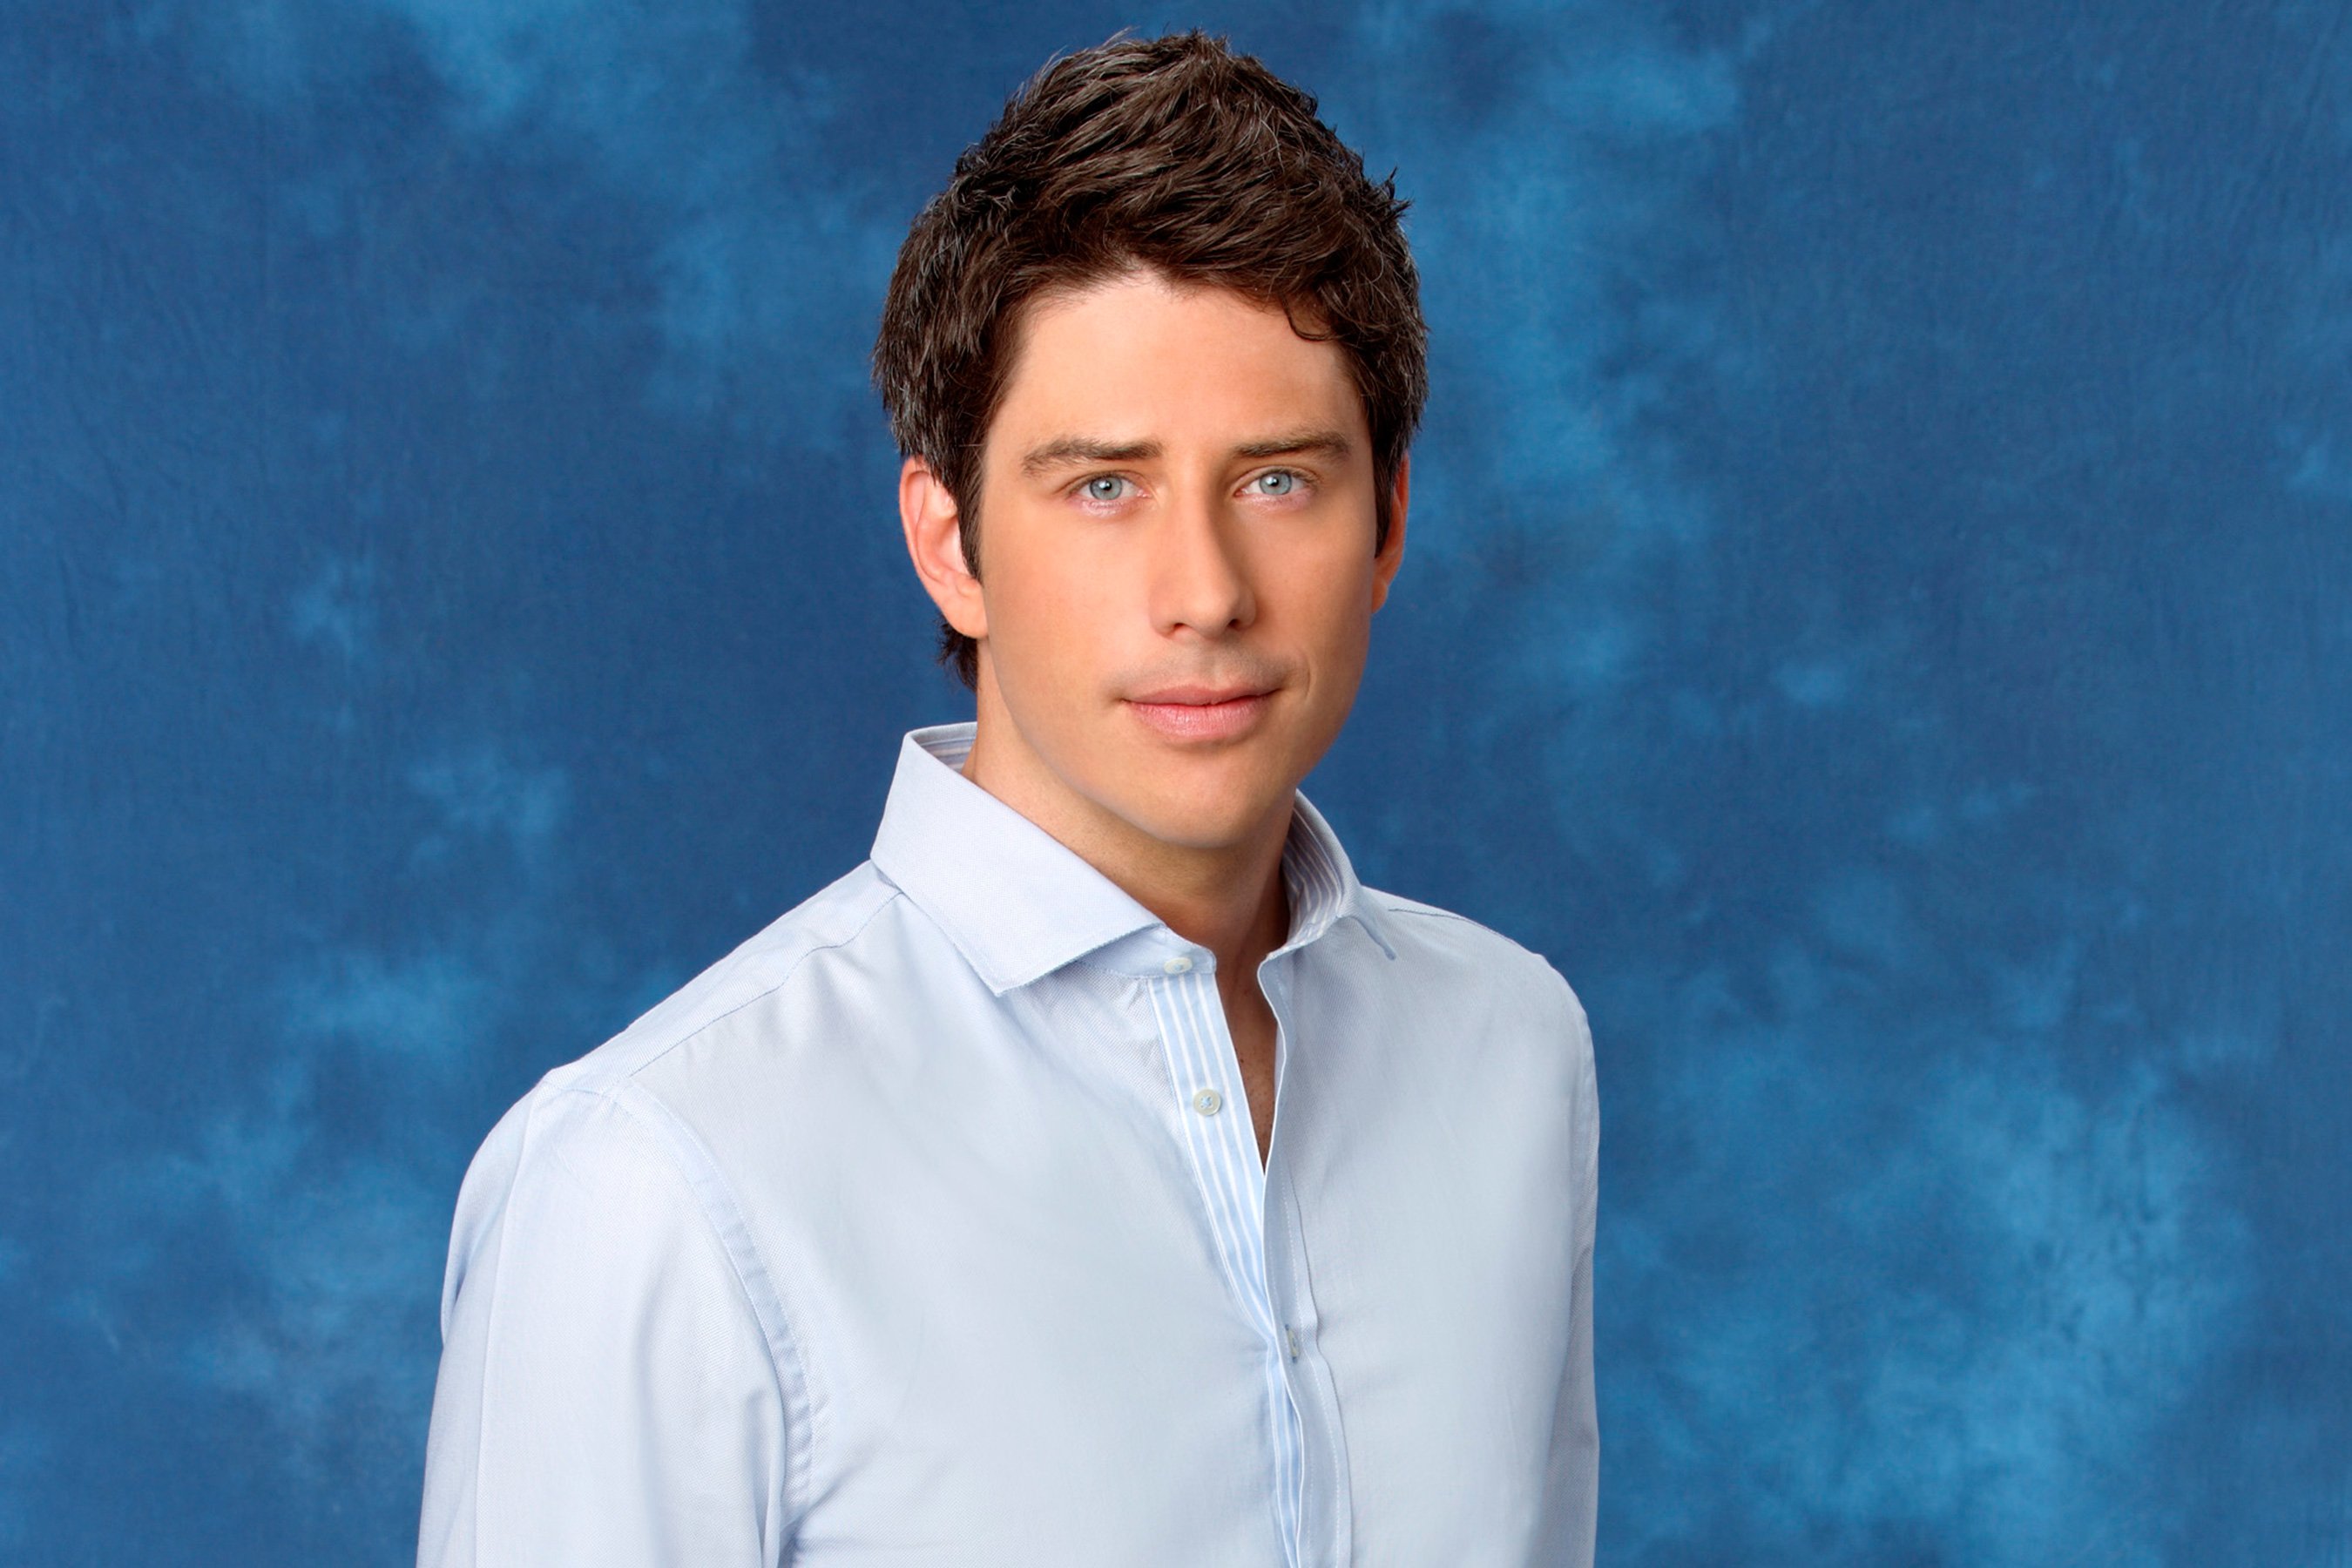 Arie Luyendyk Jr. poses in front of a blue background